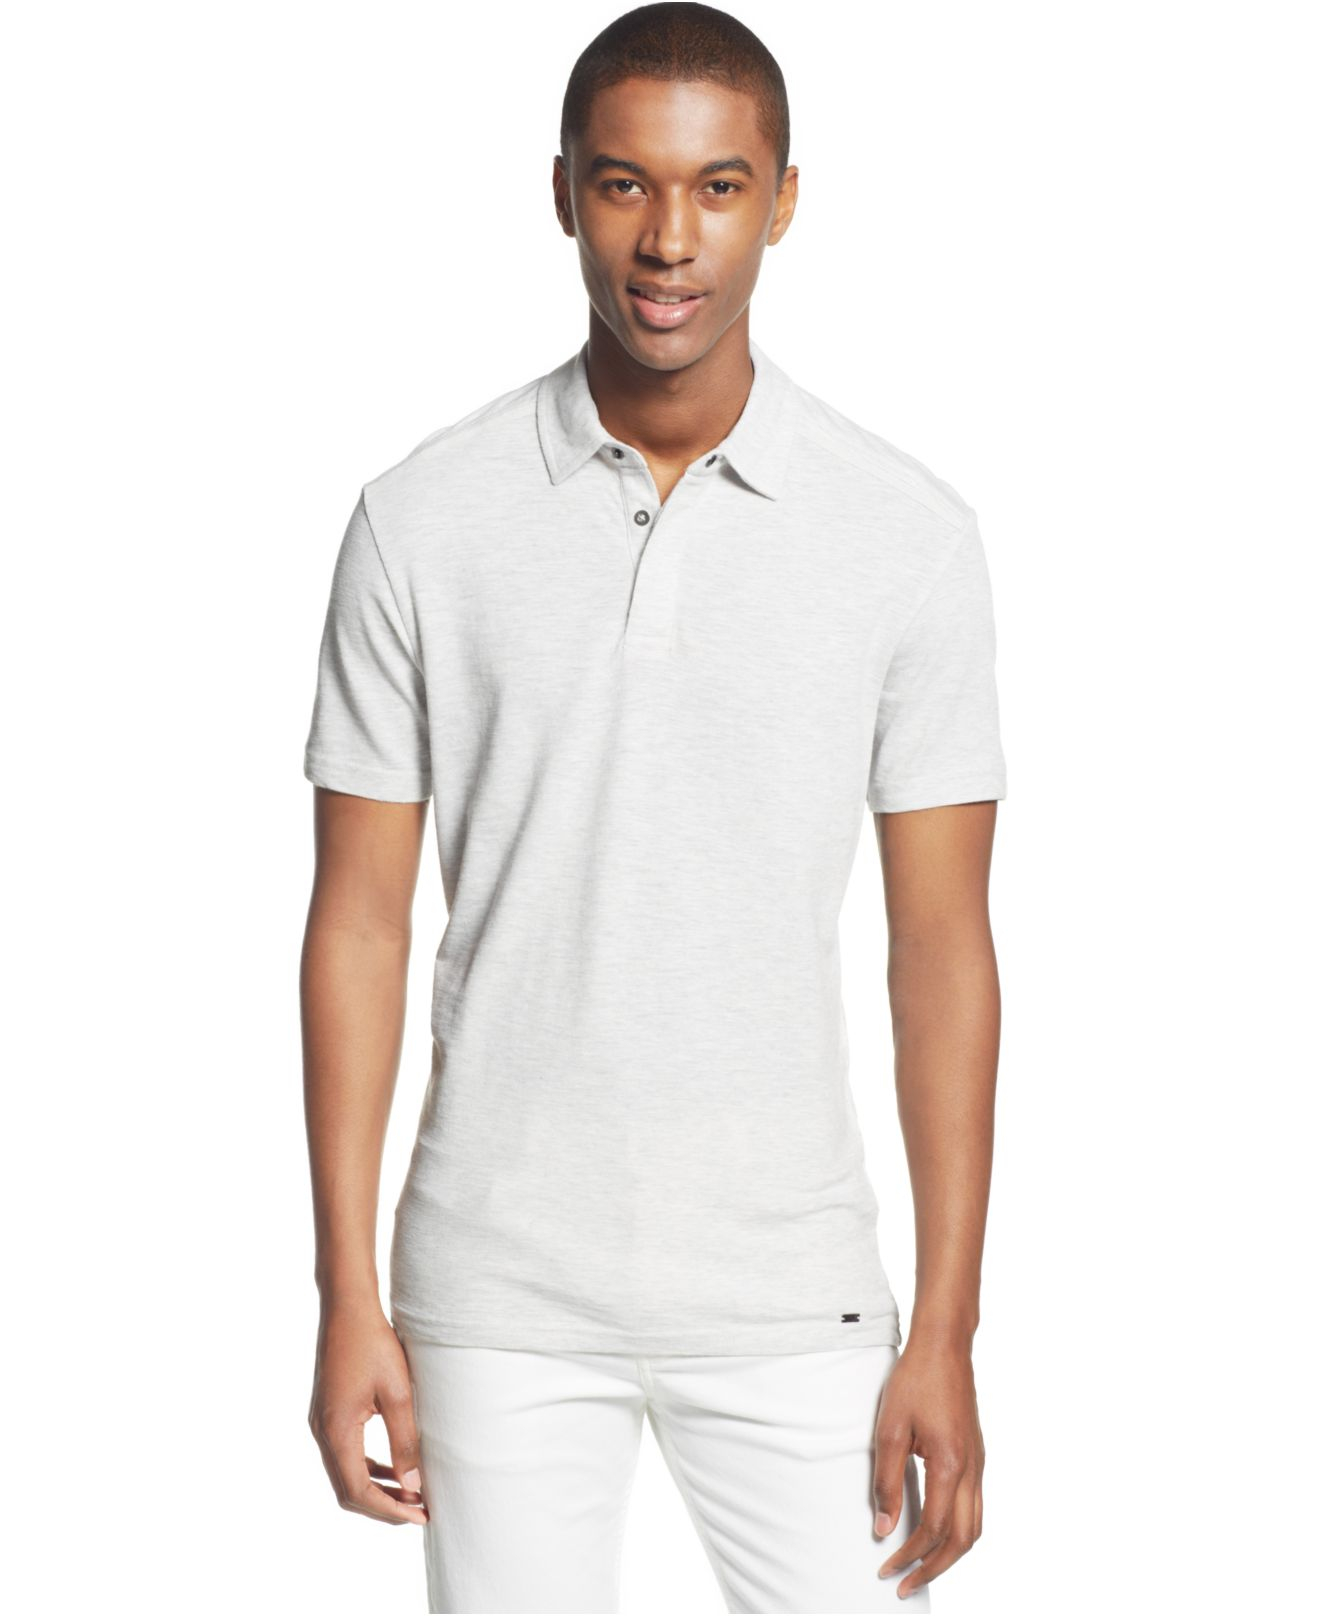 Lyst - Inc International Concepts Impeccable Polo in Gray for Men